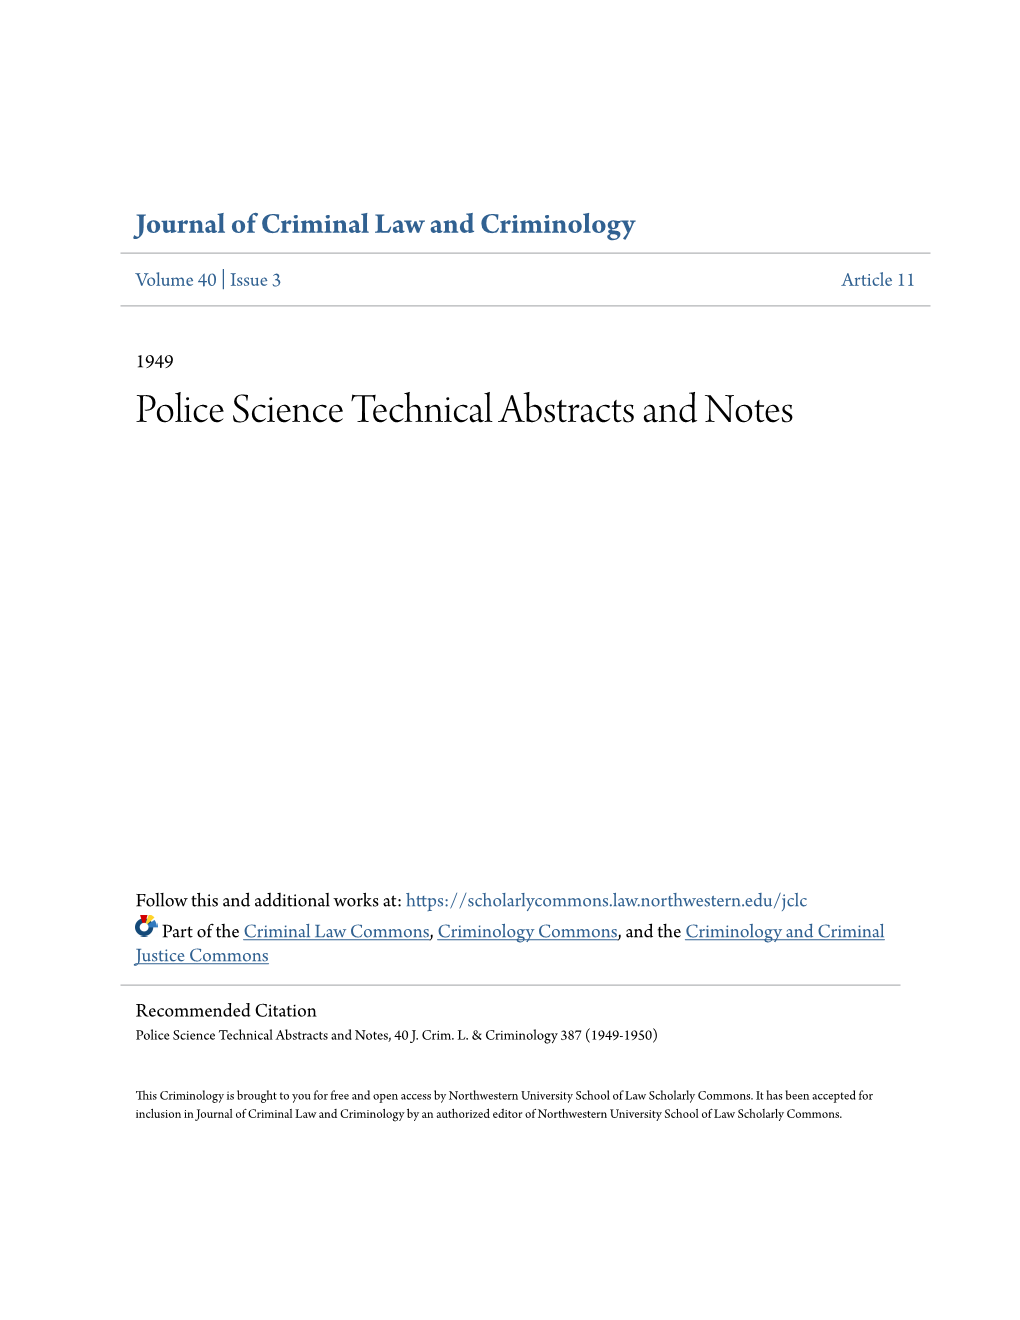 Police Science Technical Abstracts and Notes